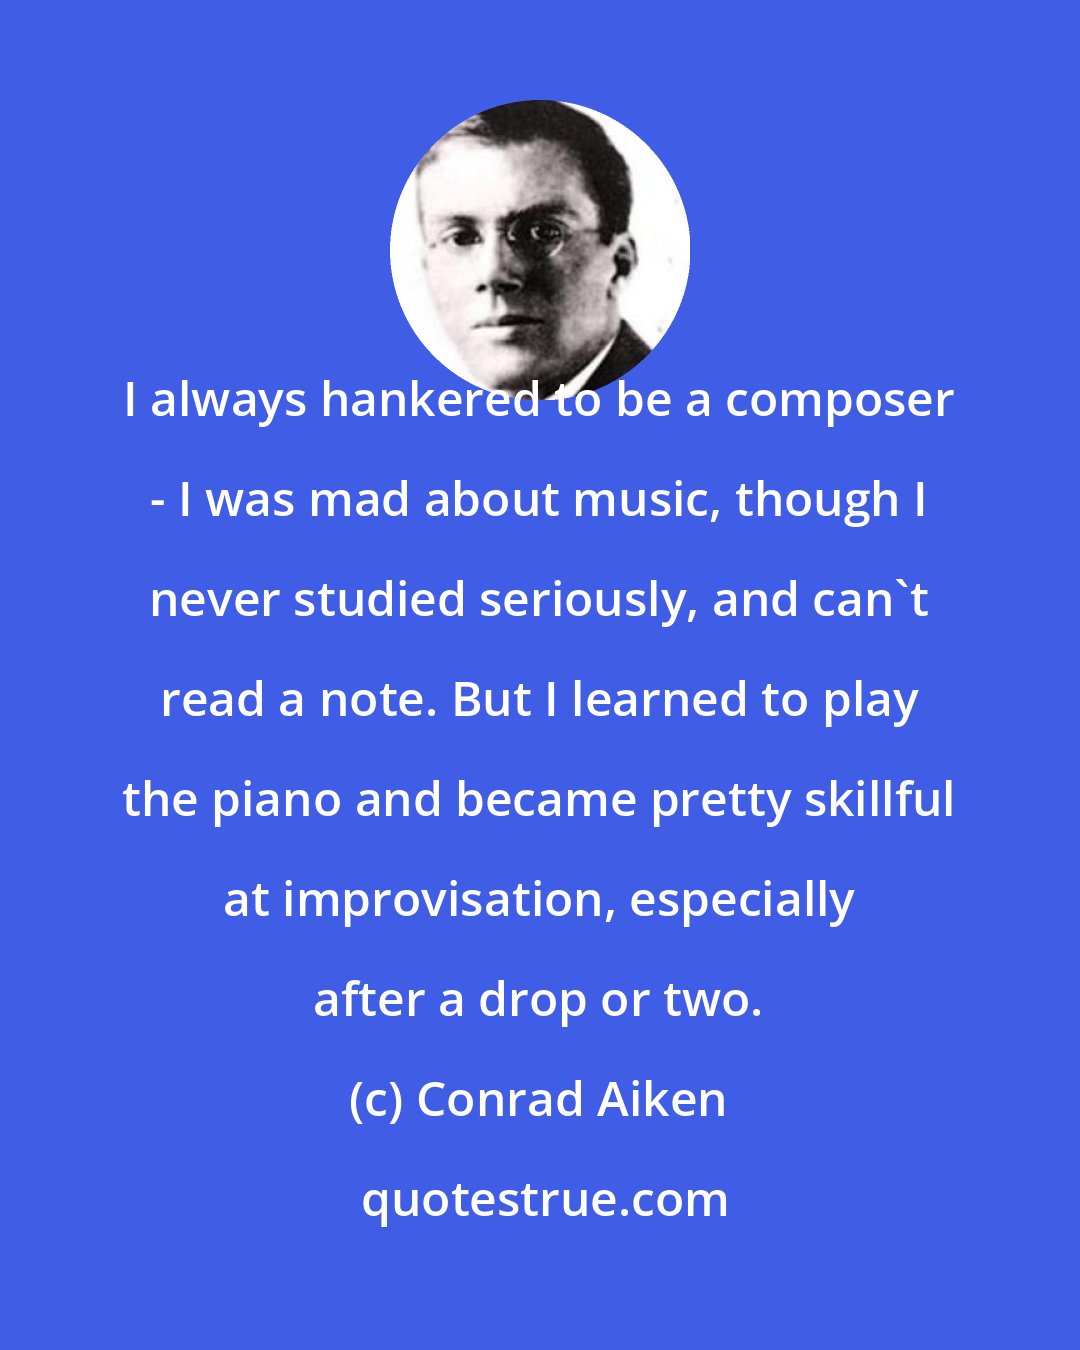 Conrad Aiken: I always hankered to be a composer - I was mad about music, though I never studied seriously, and can't read a note. But I learned to play the piano and became pretty skillful at improvisation, especially after a drop or two.